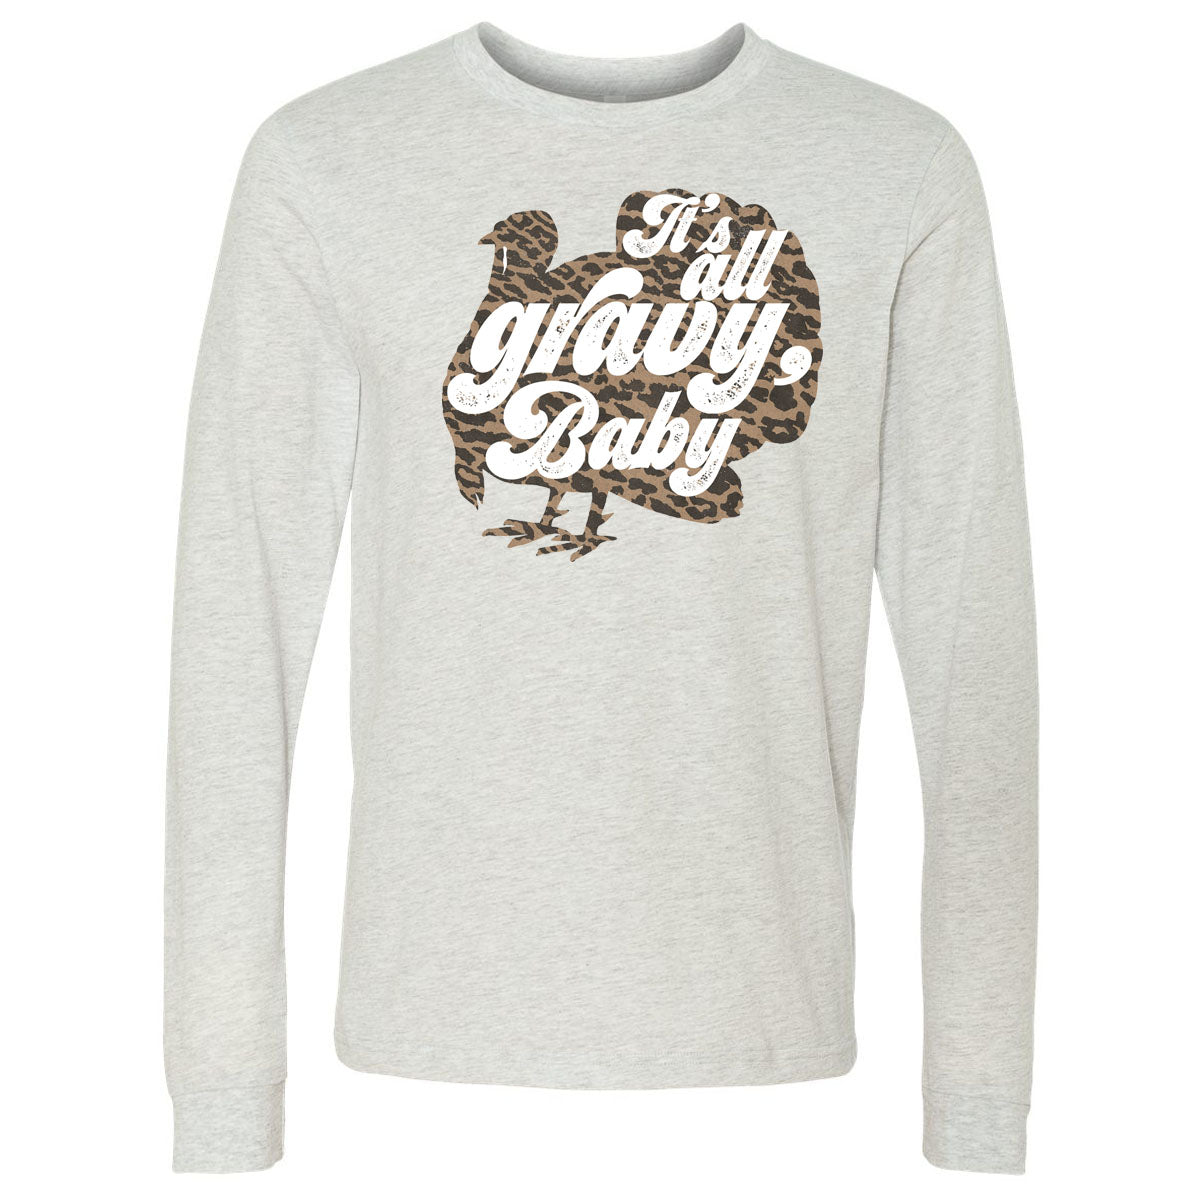 It's All Gravy Baby - Ash Tee - Southern Grace Creations